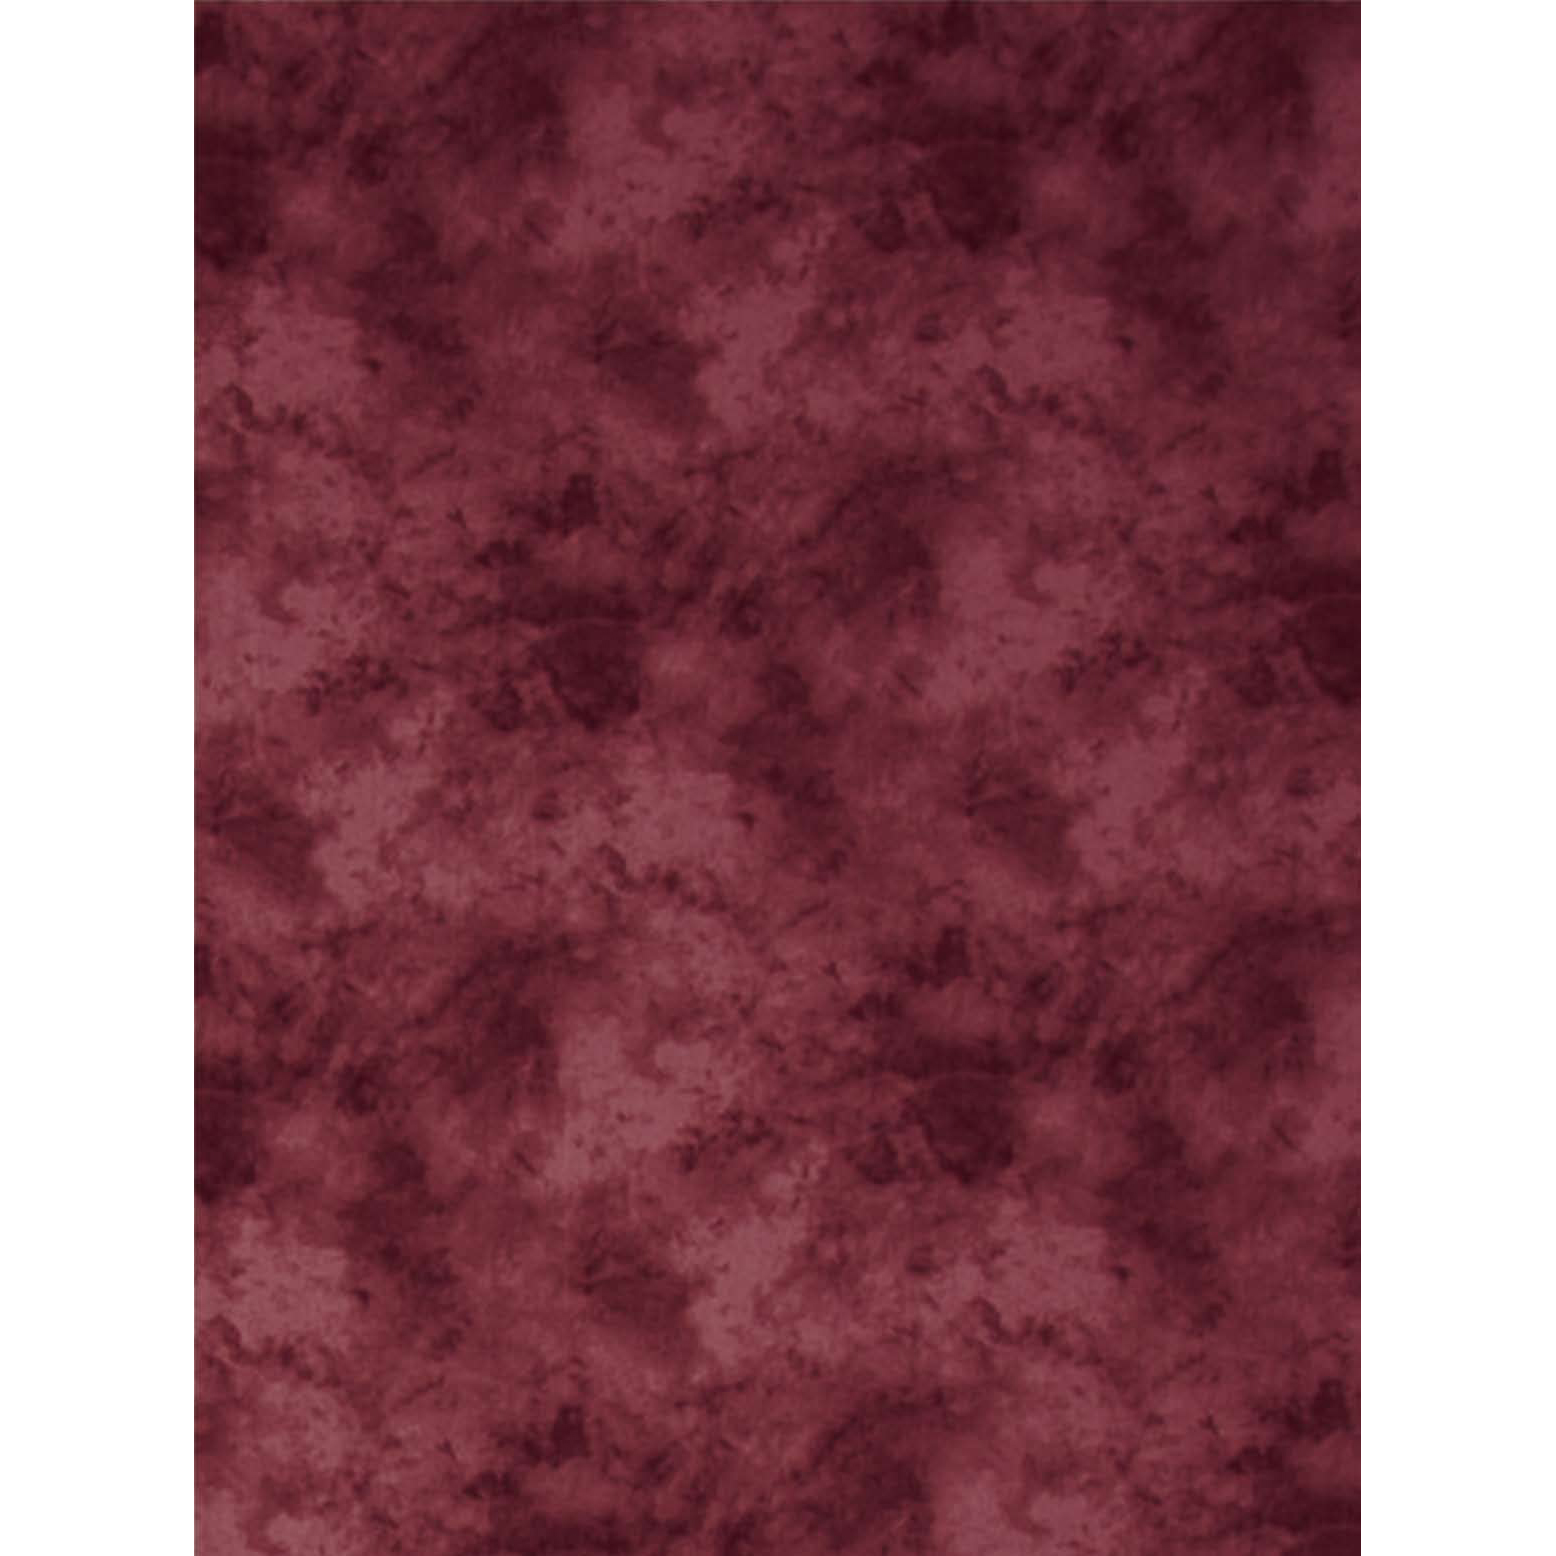 Promaster 9241 10x12' Cloud Dyed Cloth Background (Red)